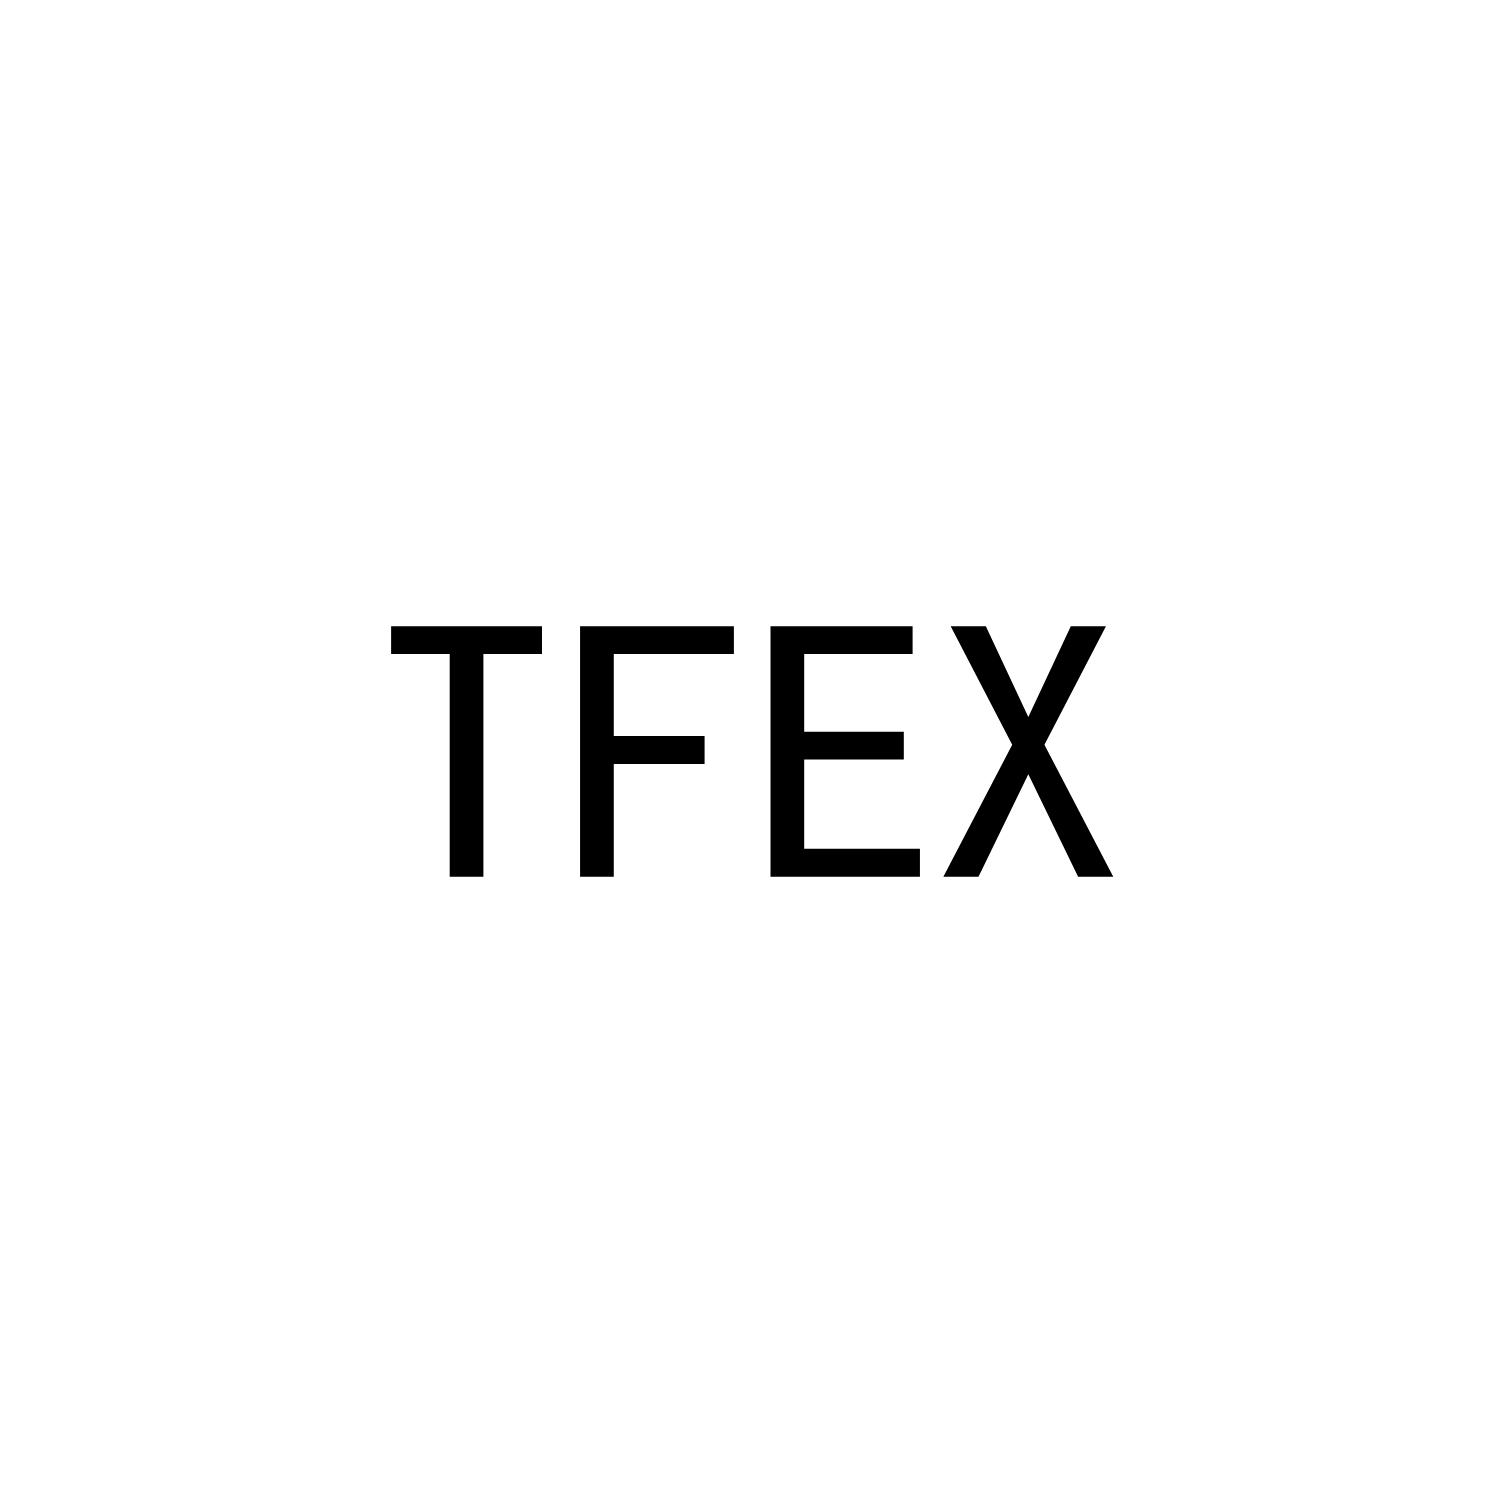 TFEX